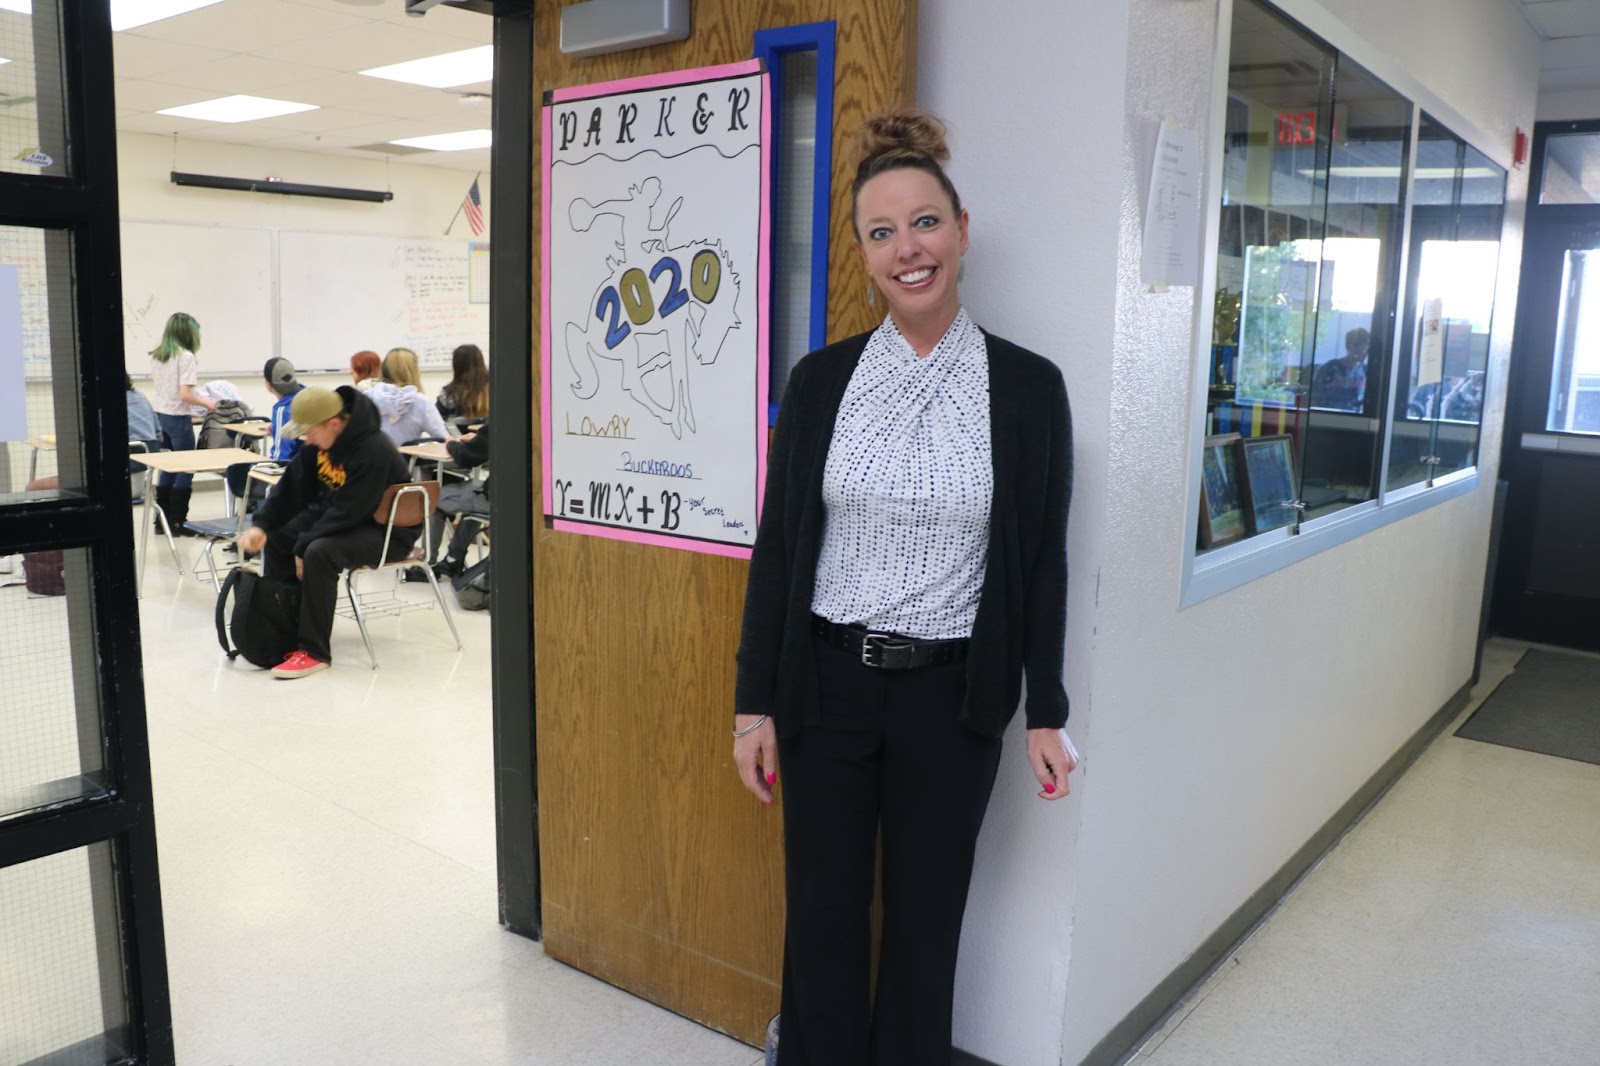 Ms. Parker stands outside her classroom to show off her “Dress for Success” outfit. /Cylie Spriet • The Brand